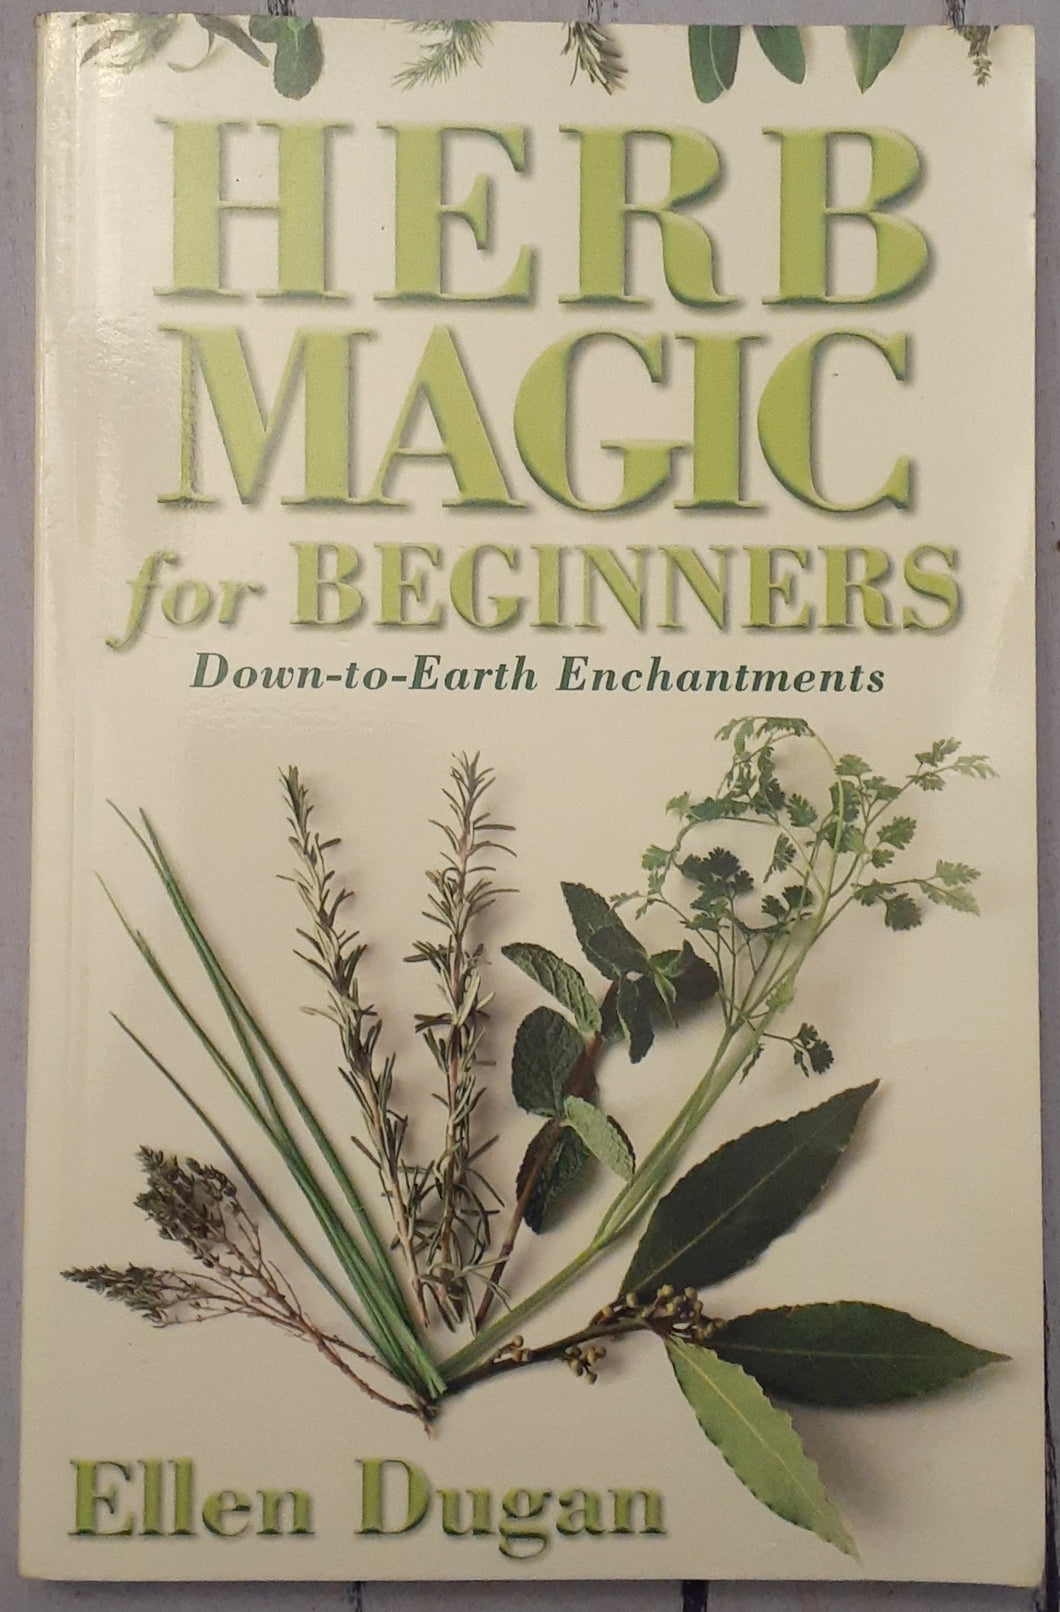 Herb Magic for Beginners